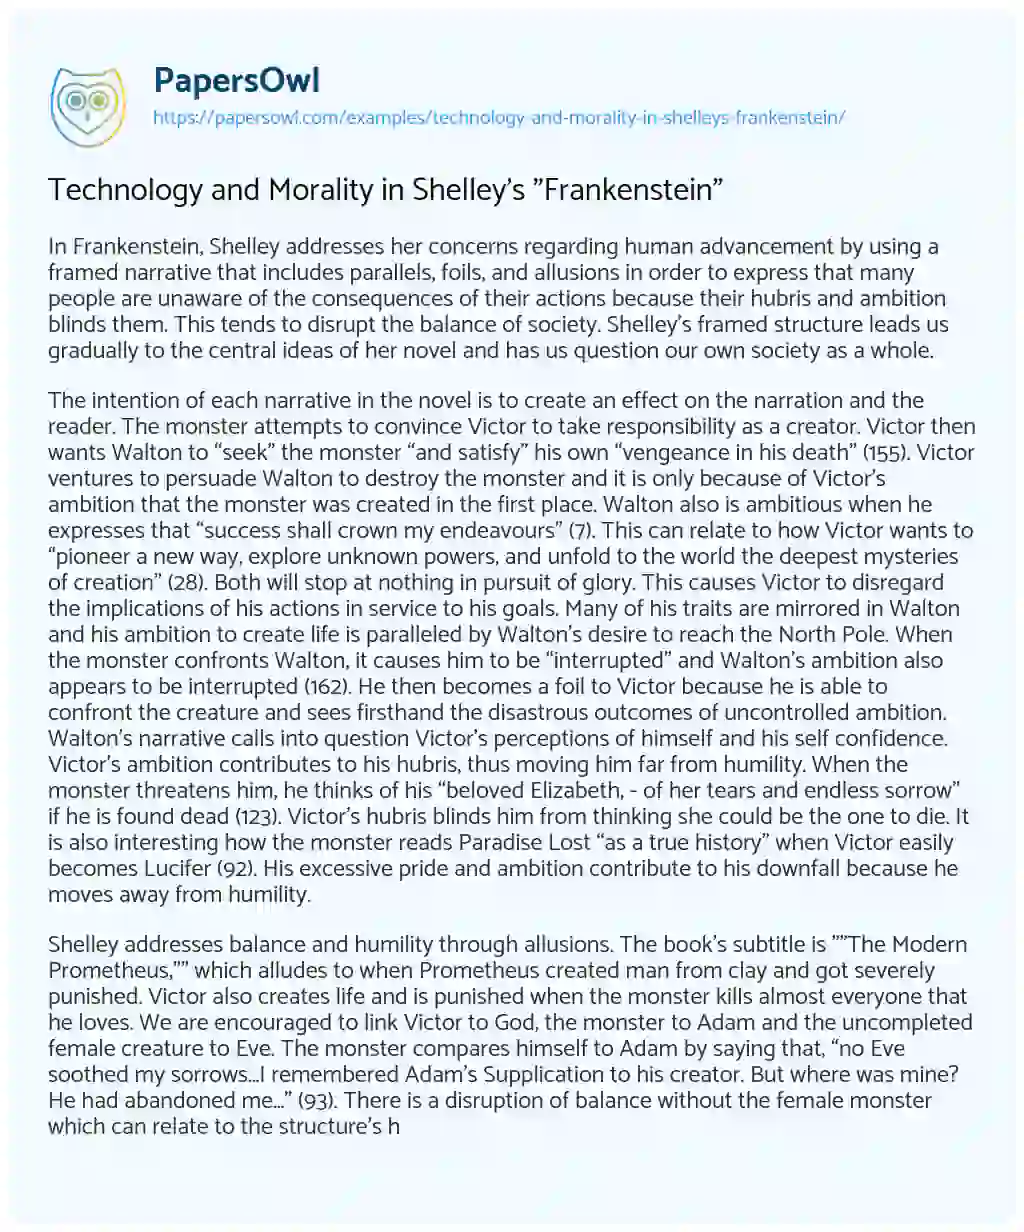 Essay on Technology and Morality in Shelley’s “Frankenstein”